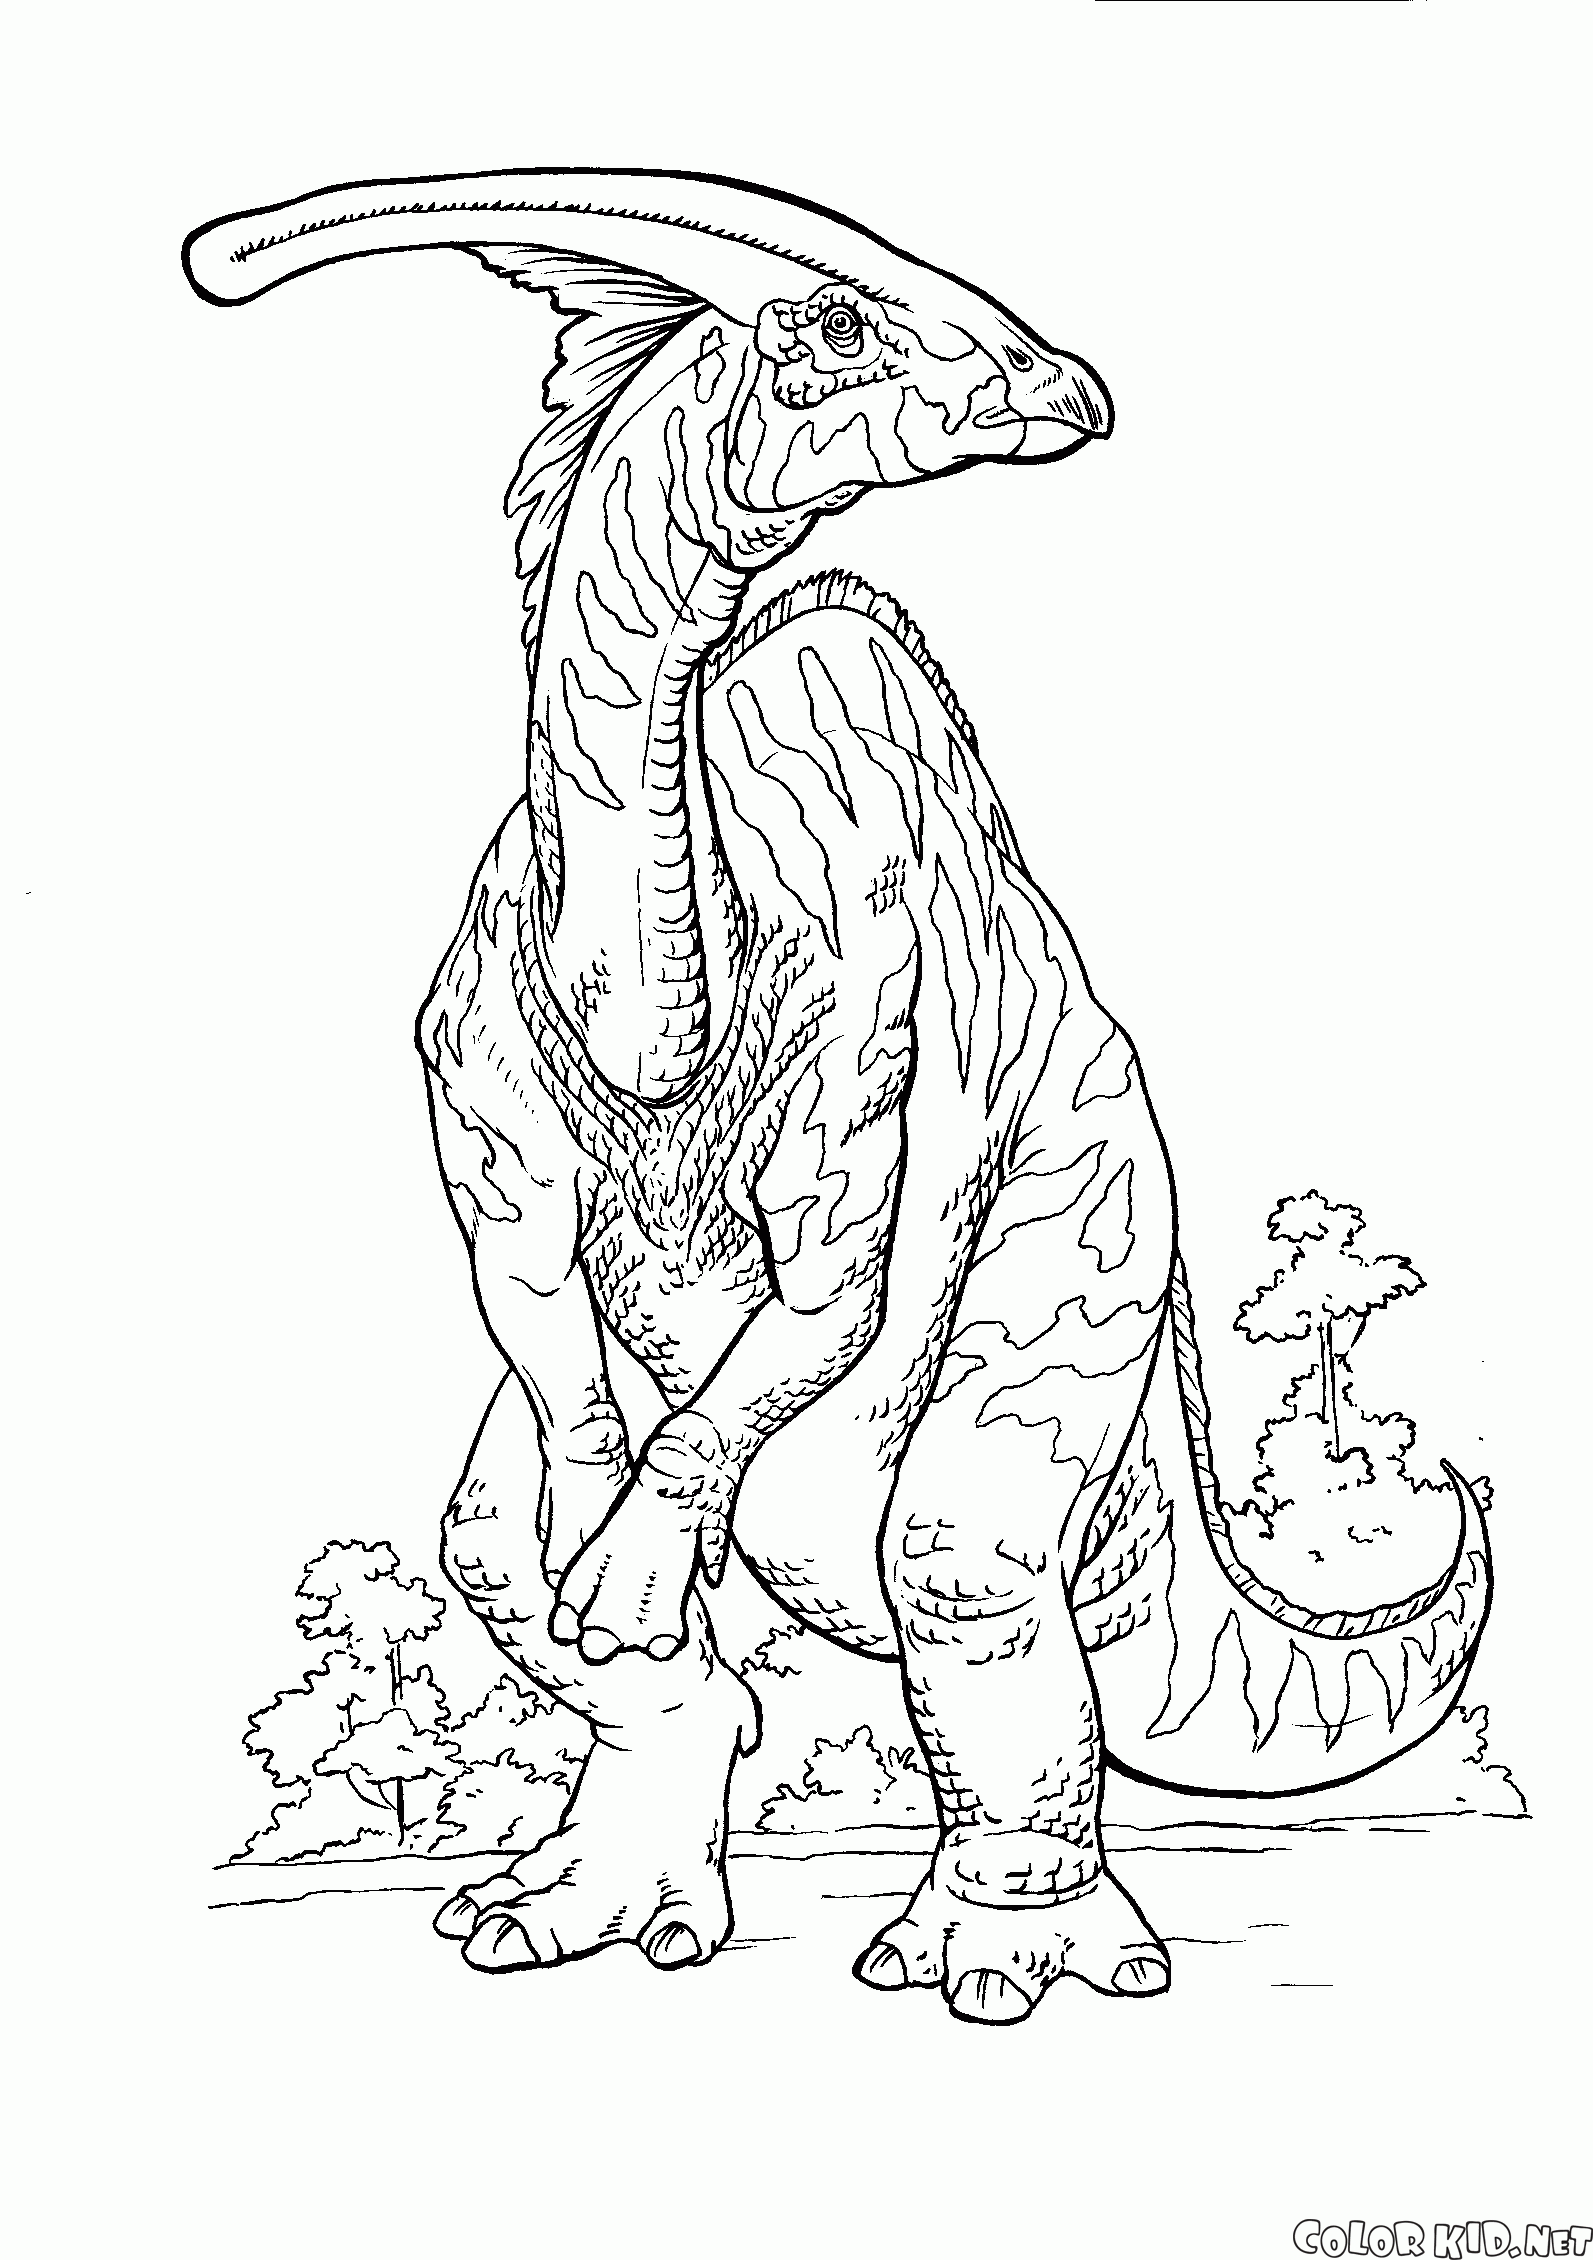 Coloring page - Dinosaurs